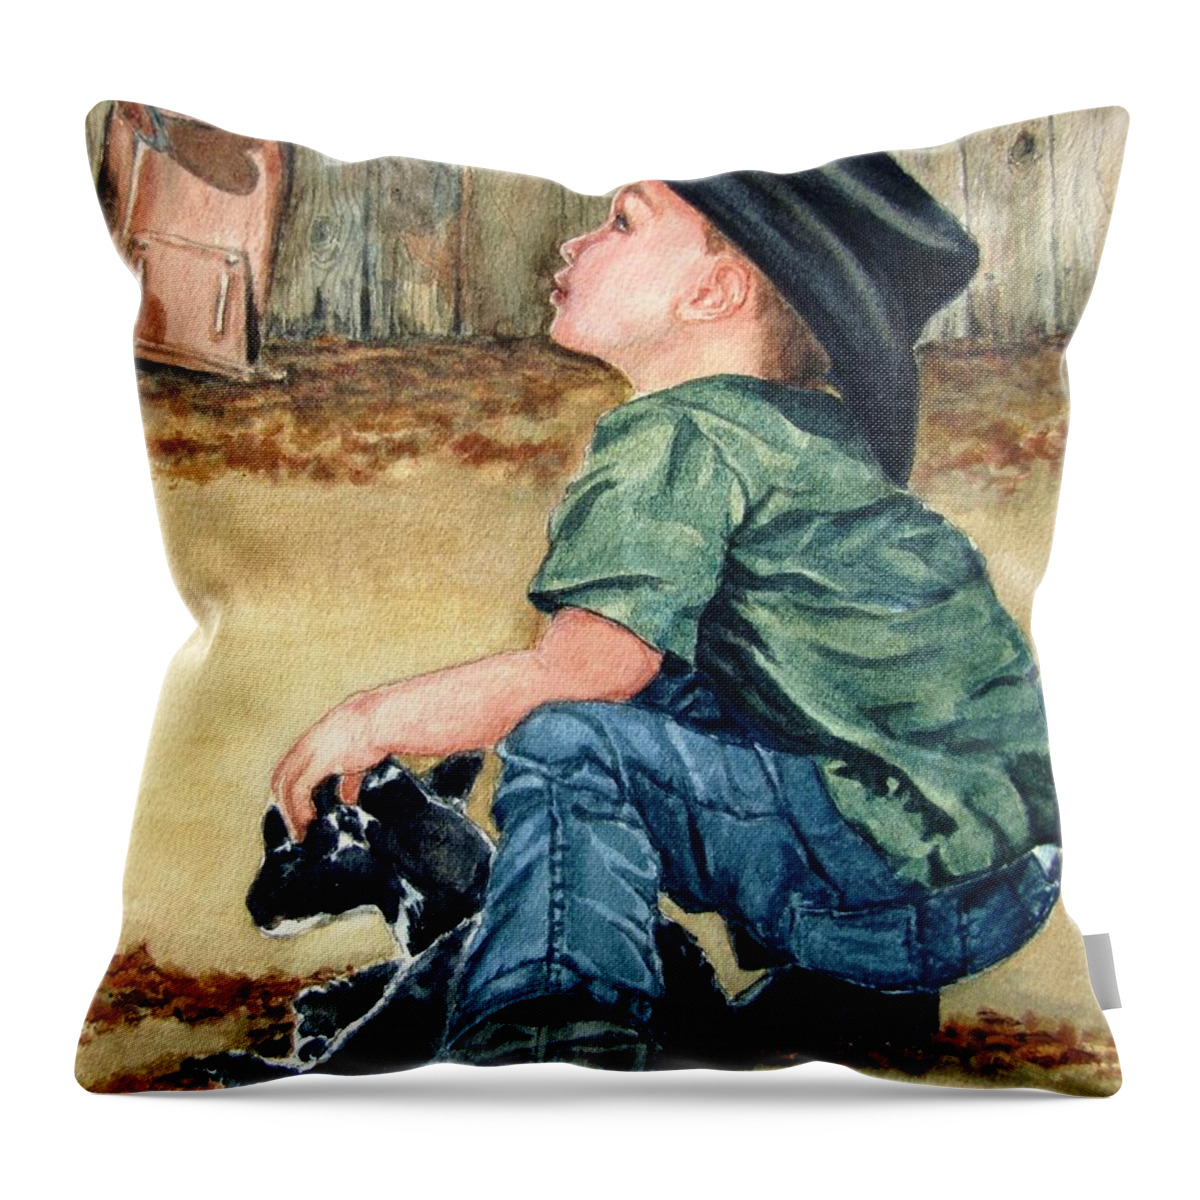 Children Throw Pillow featuring the painting Little Ranchhand by Karen Ilari